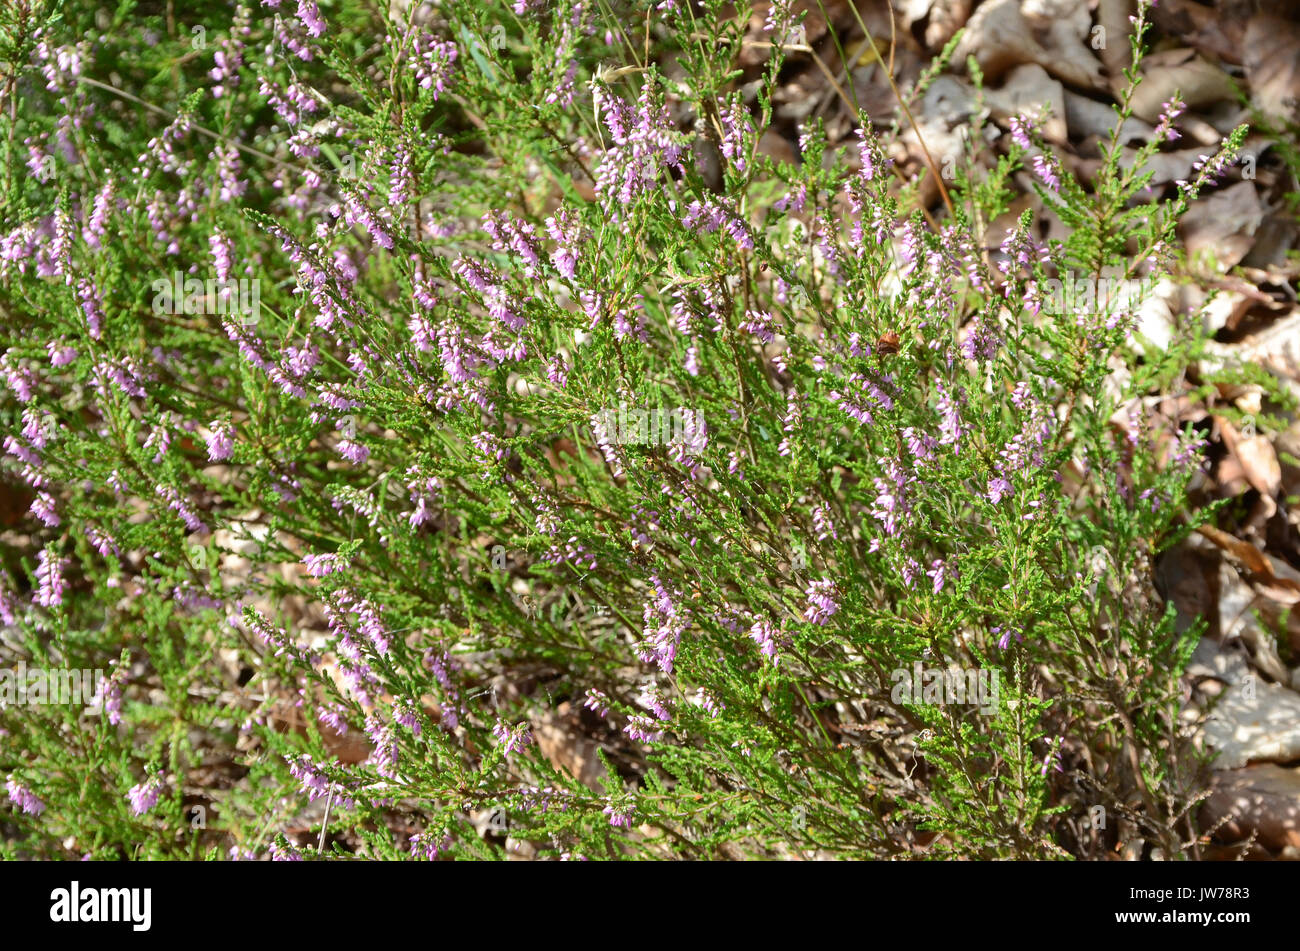 Heather surface with lilac flowers and some withered leaves. Stock Photo